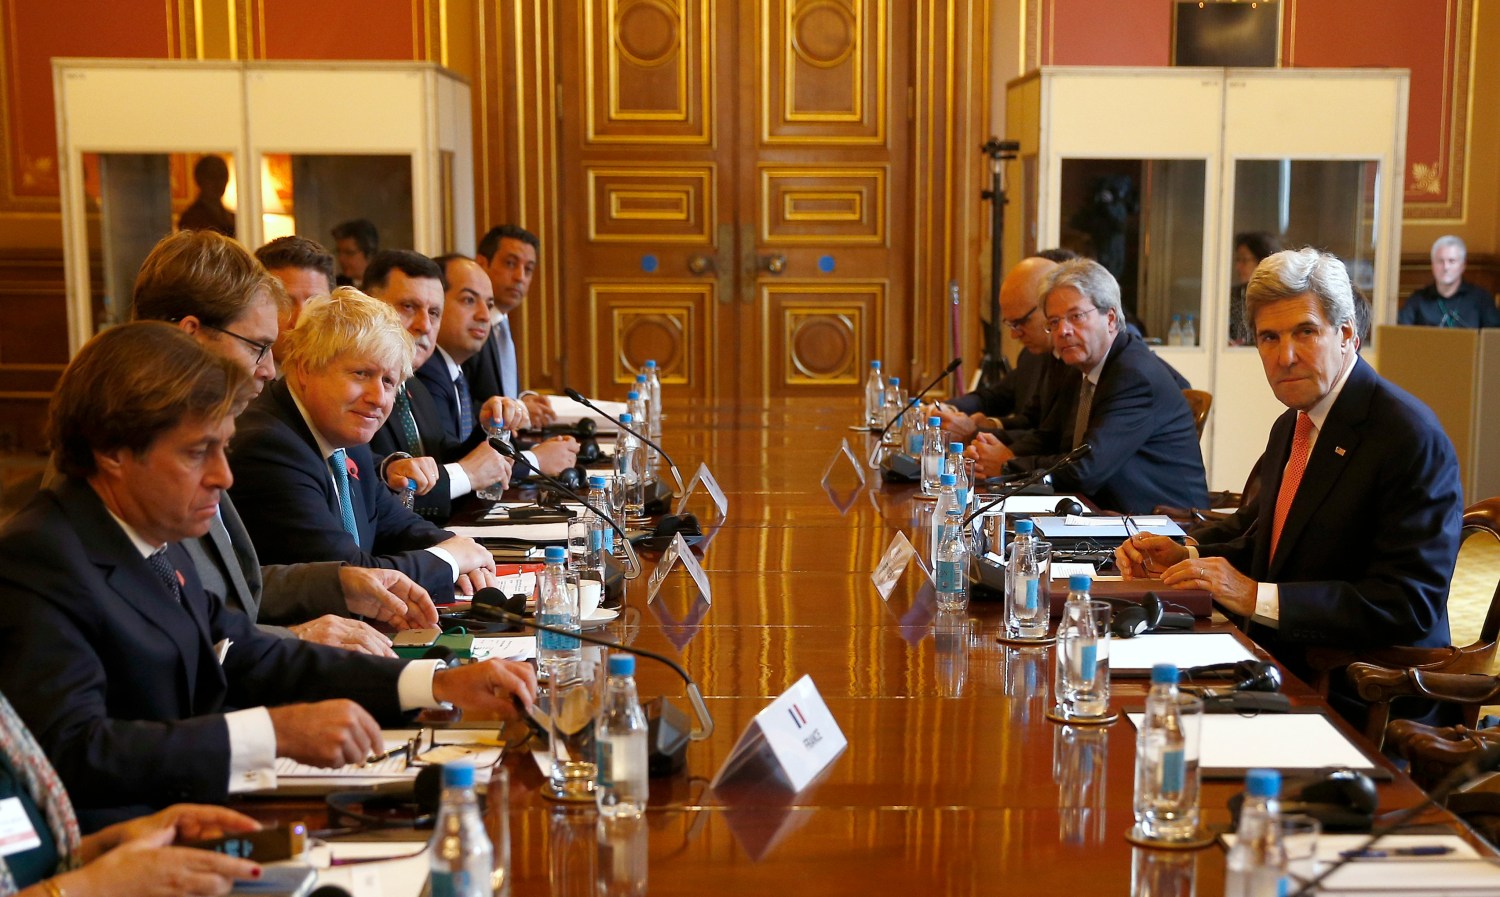 U.S. Secretary of State John Kerry (R) attends the Libyan Ministerial meeting with Britain's Foreign Secretary Boris Johnson (3rd L), French Director of Political Affairs, Nicolas de Riviere (L) and Libya's Prime Minister and Deputy Prime minister, at the Foreign and Commonwealth Office in London, Britain October 31, 2016. REUTERS/Peter Nicholls - RTX2R5JW